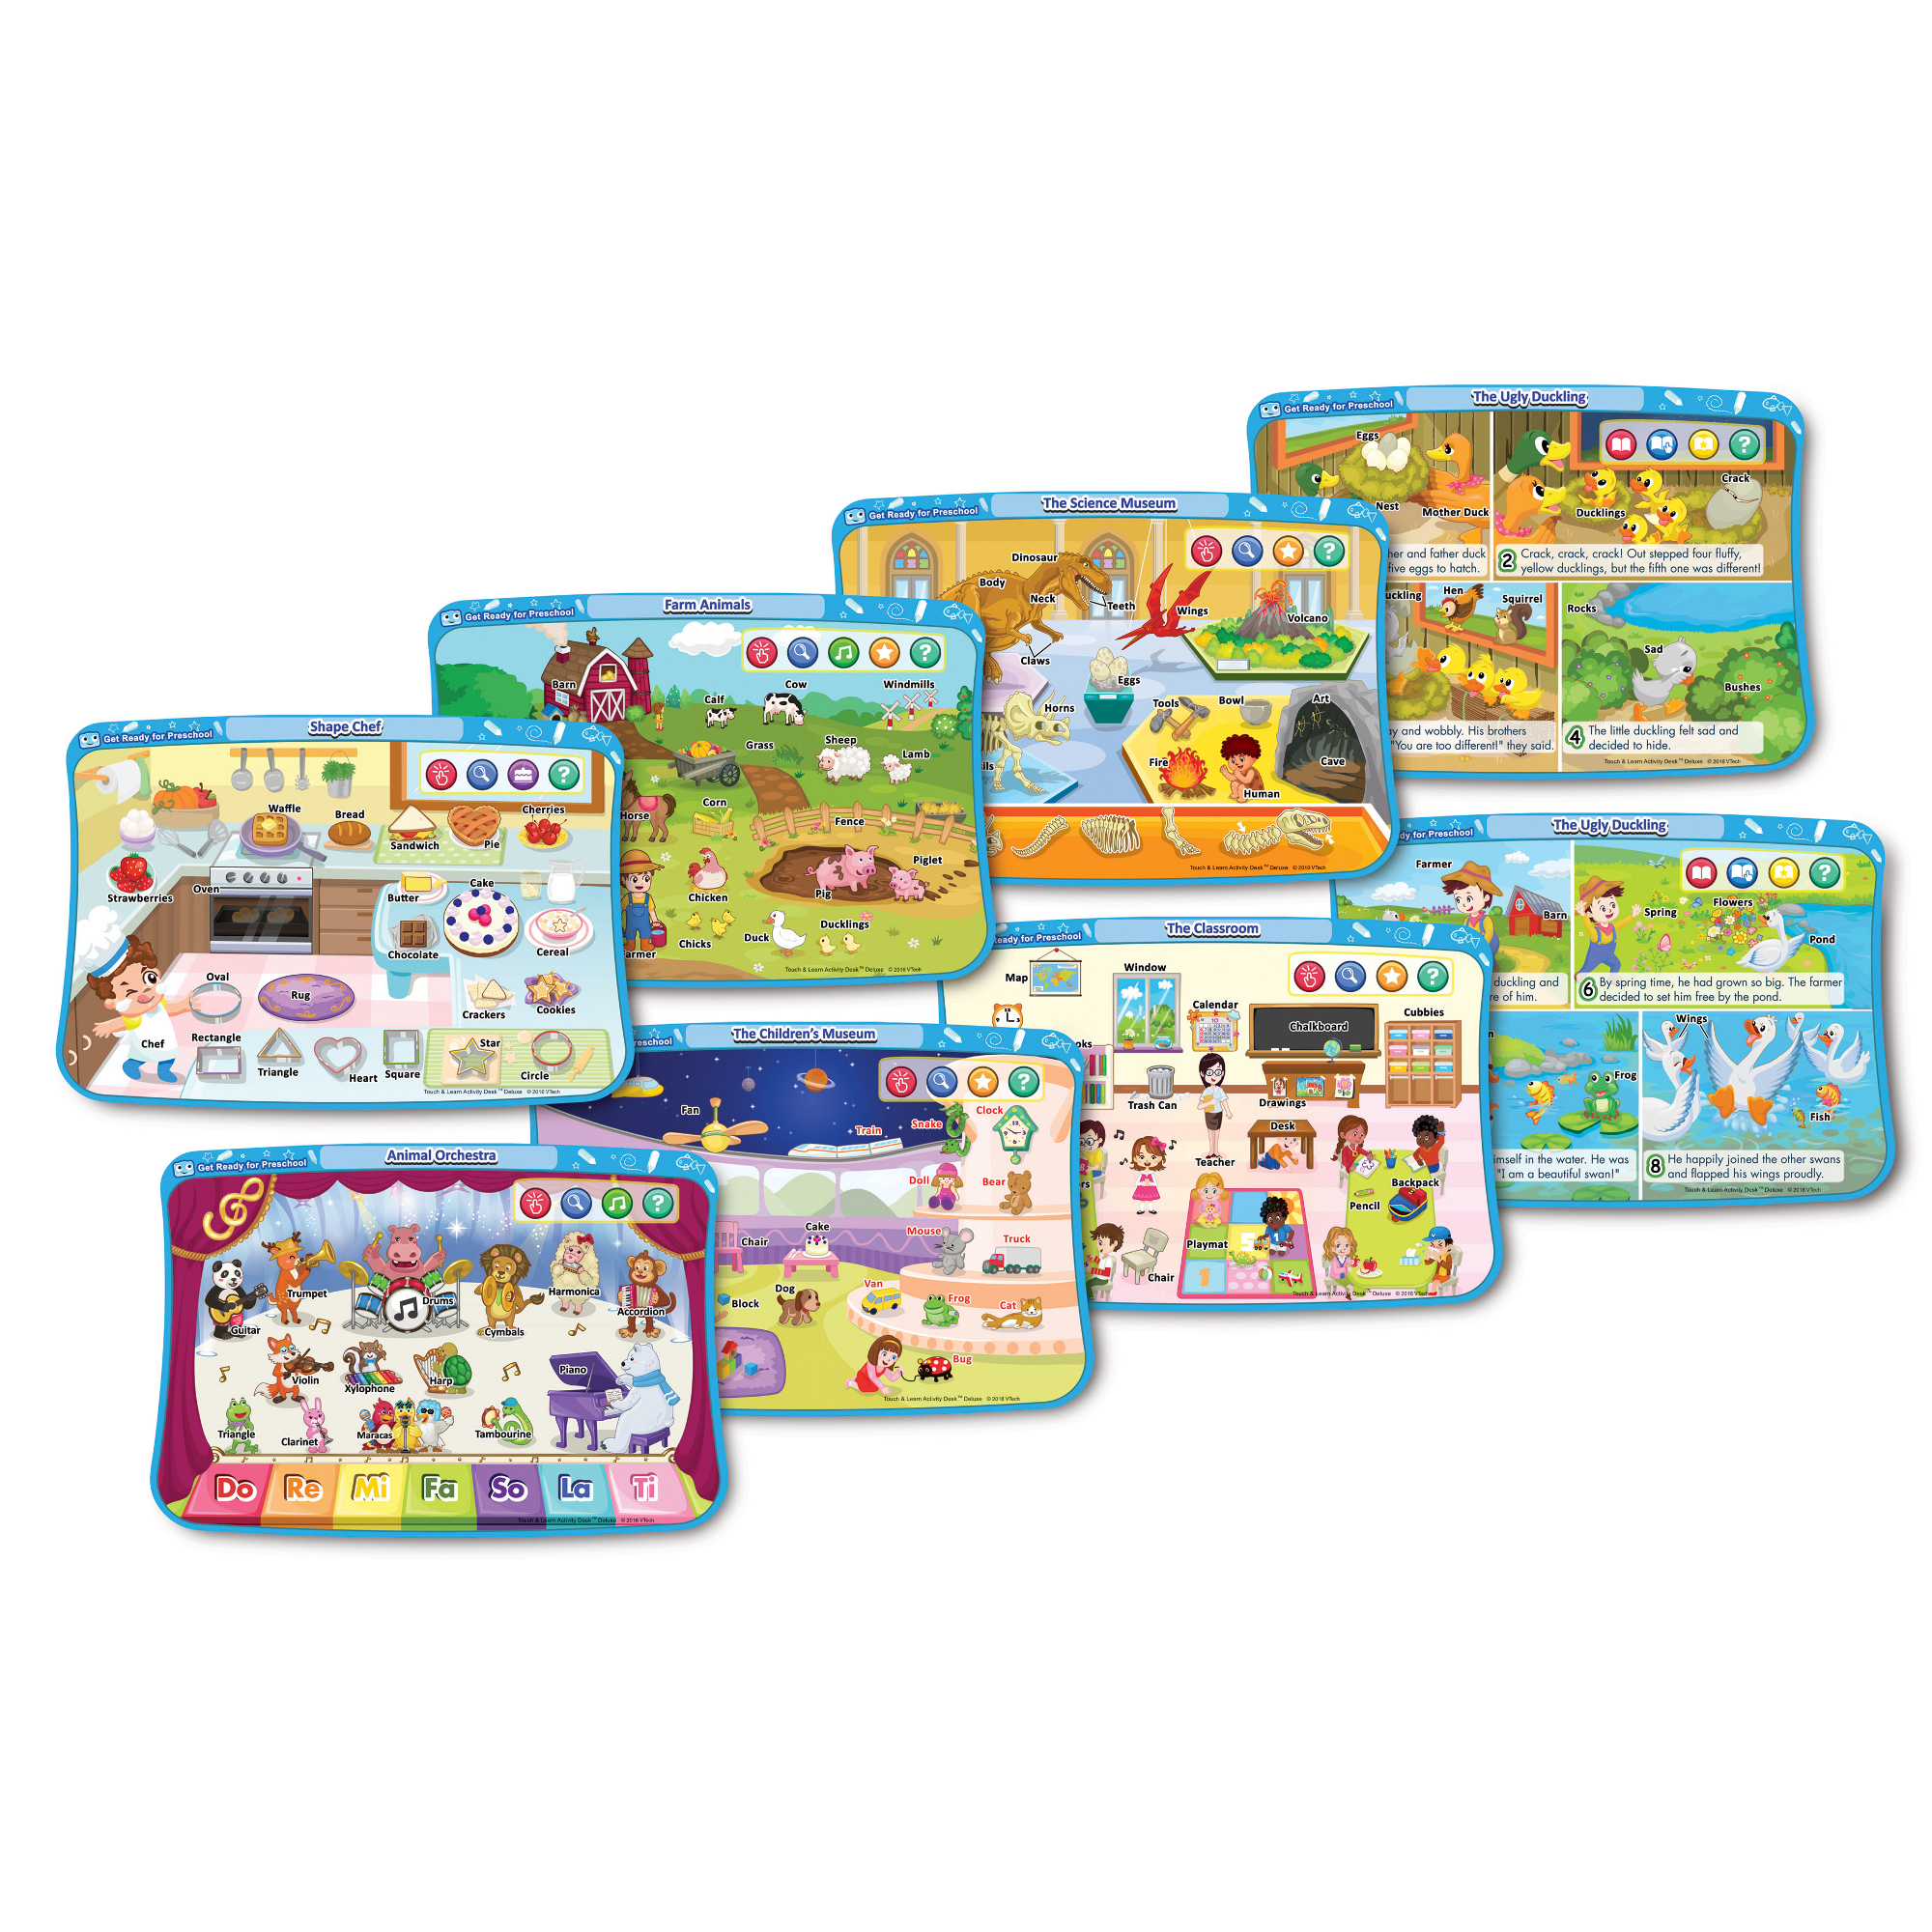 When I Grow Up *** Details about   VTech Touch & Learn Activity Desk Deluxe Expansion Pack 